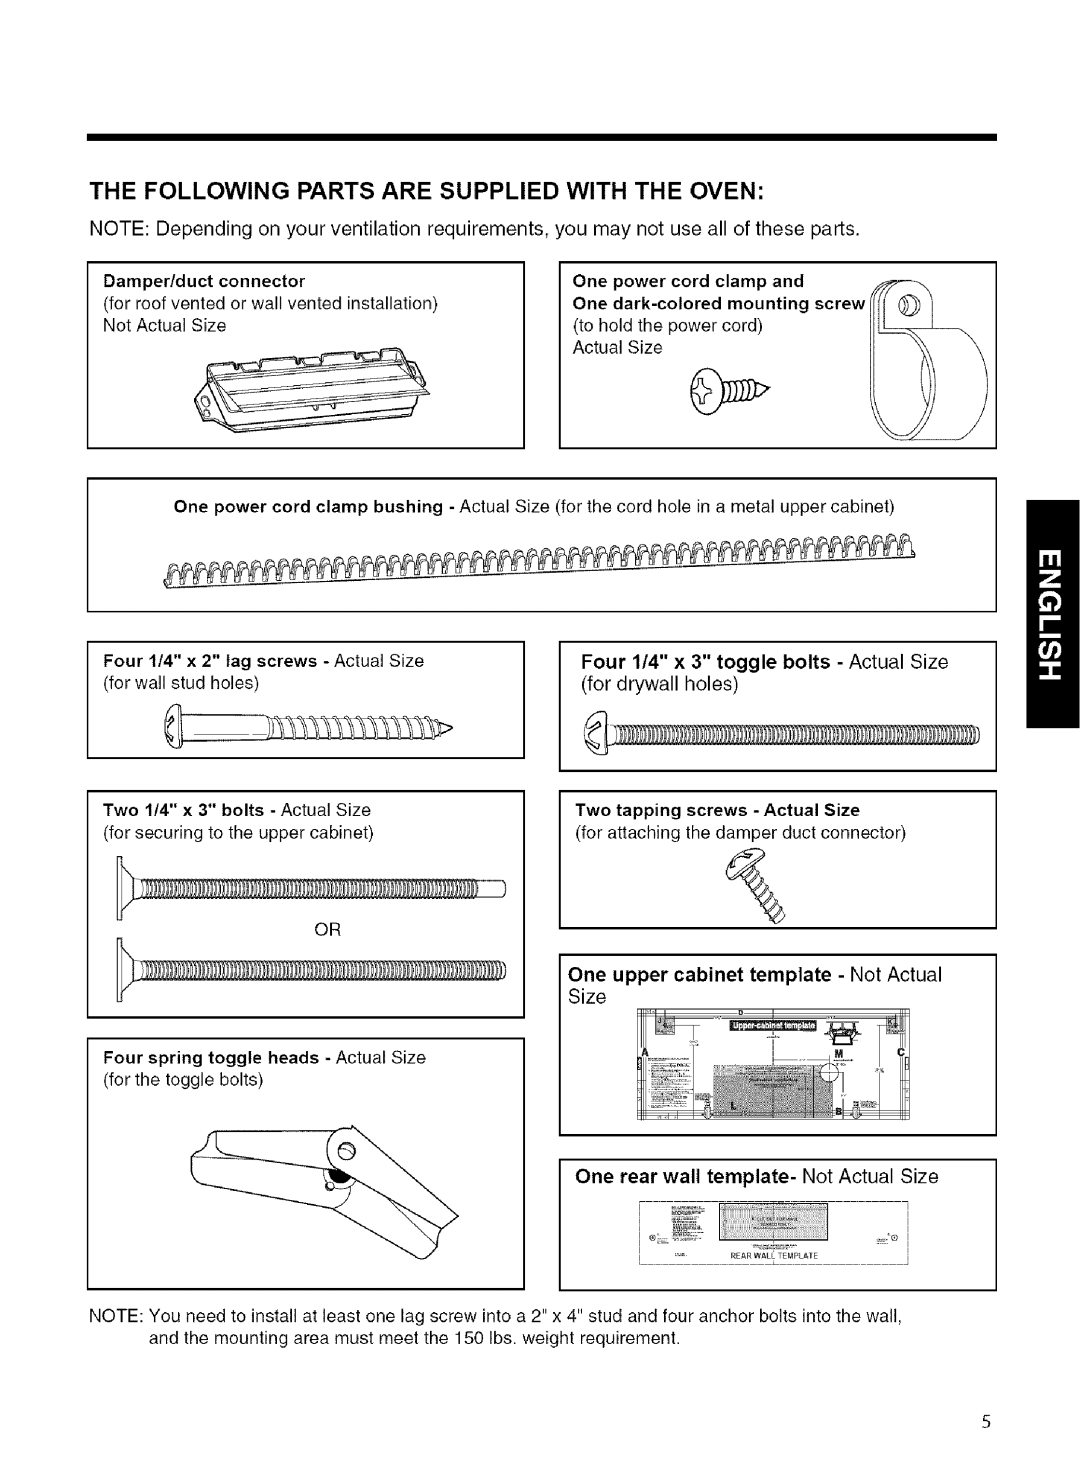 Kenmore 721.80042, 721.80049, 721.80043, 721.80044 installation instructions The Following Parts Are Supplied With The Oven 